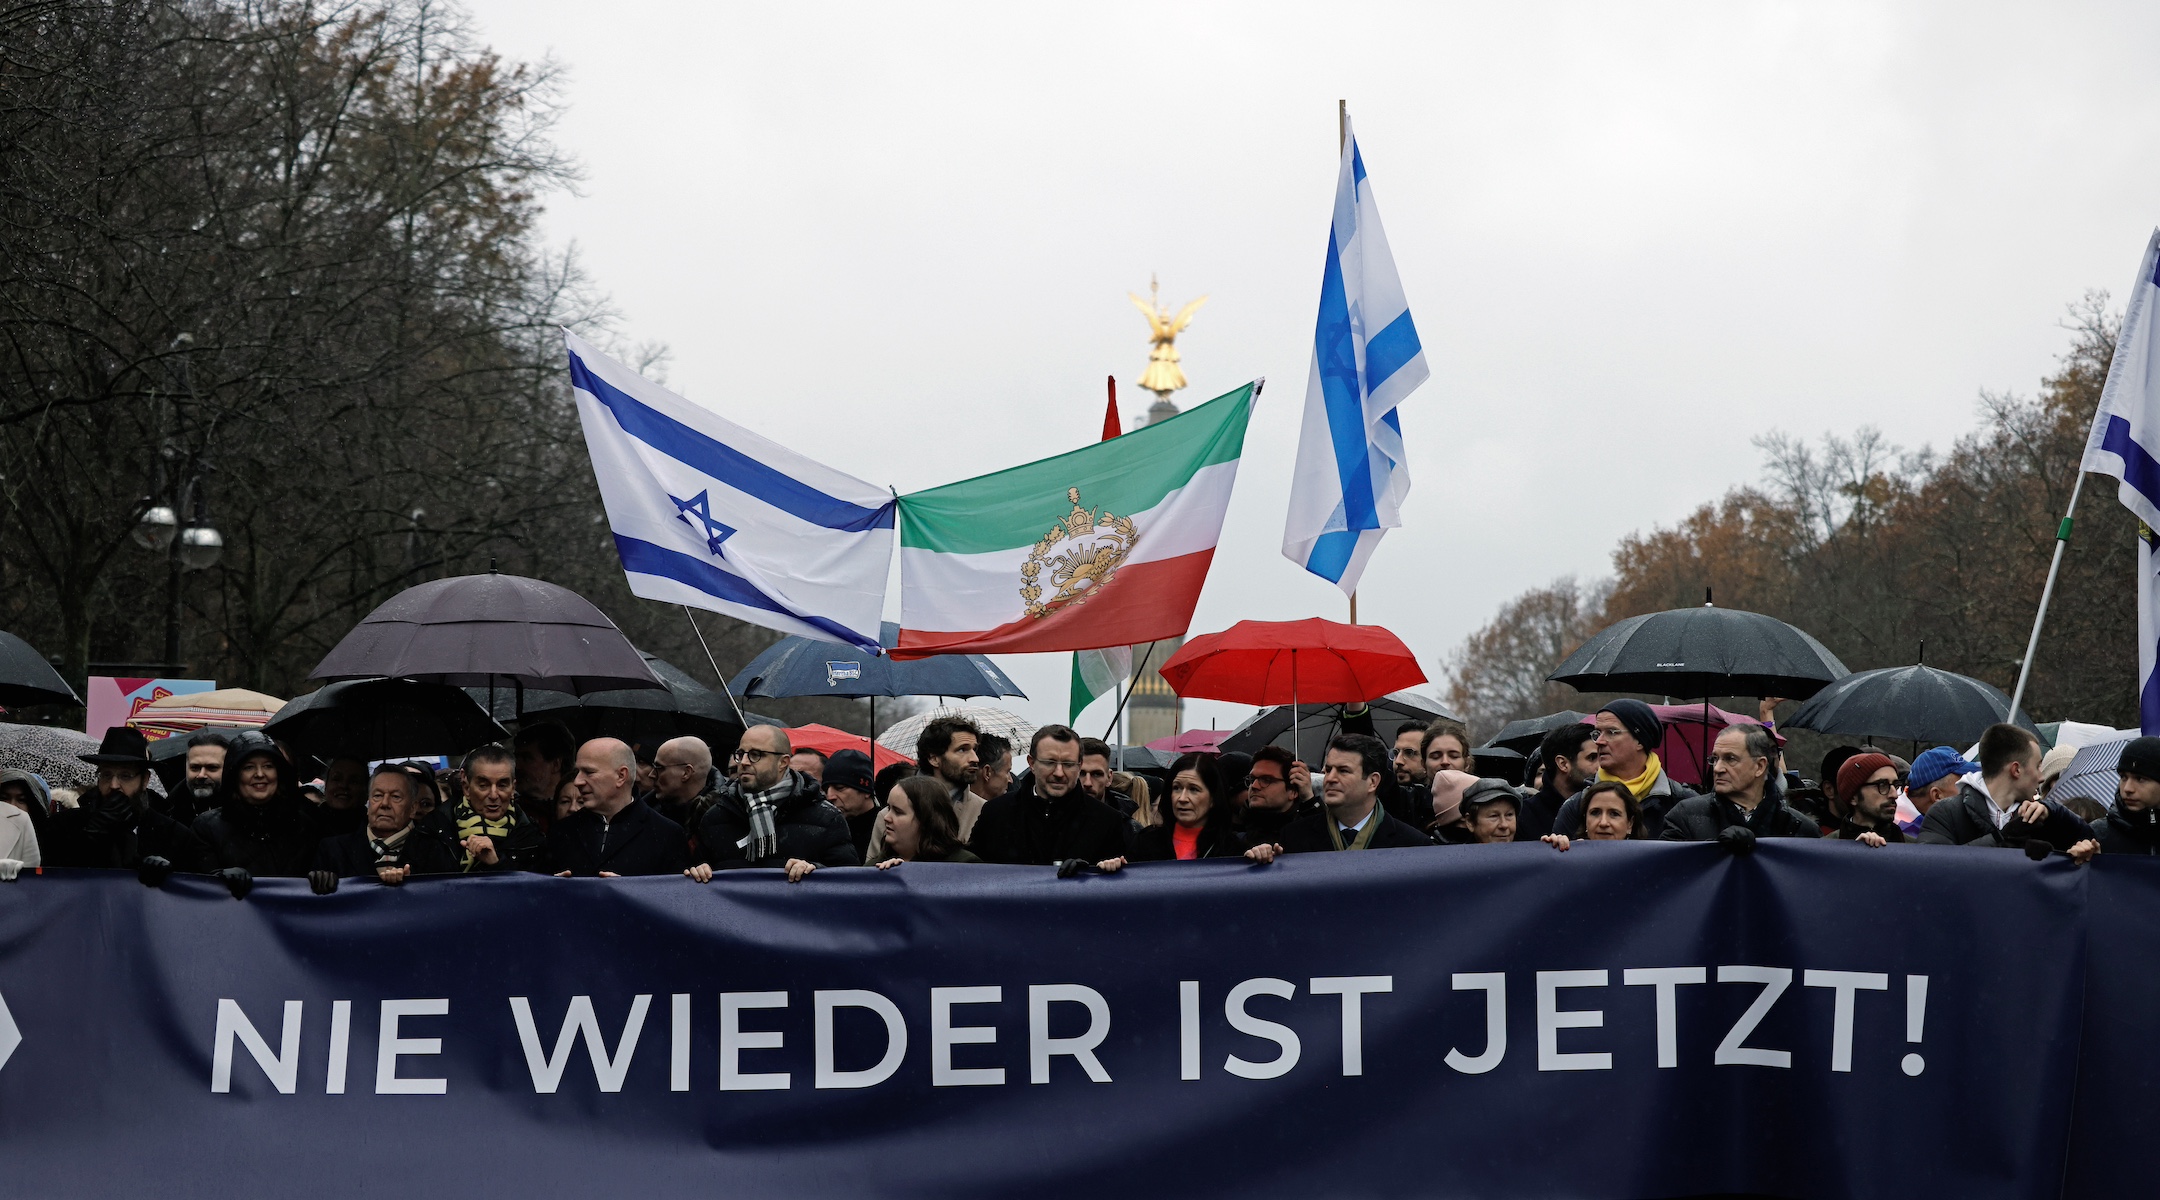 A banner reads “Never again is now!” at a pro-Israel rally in Berlin, Dec. 10, 2023. (Carsten Koall/picture alliance via Getty Images)